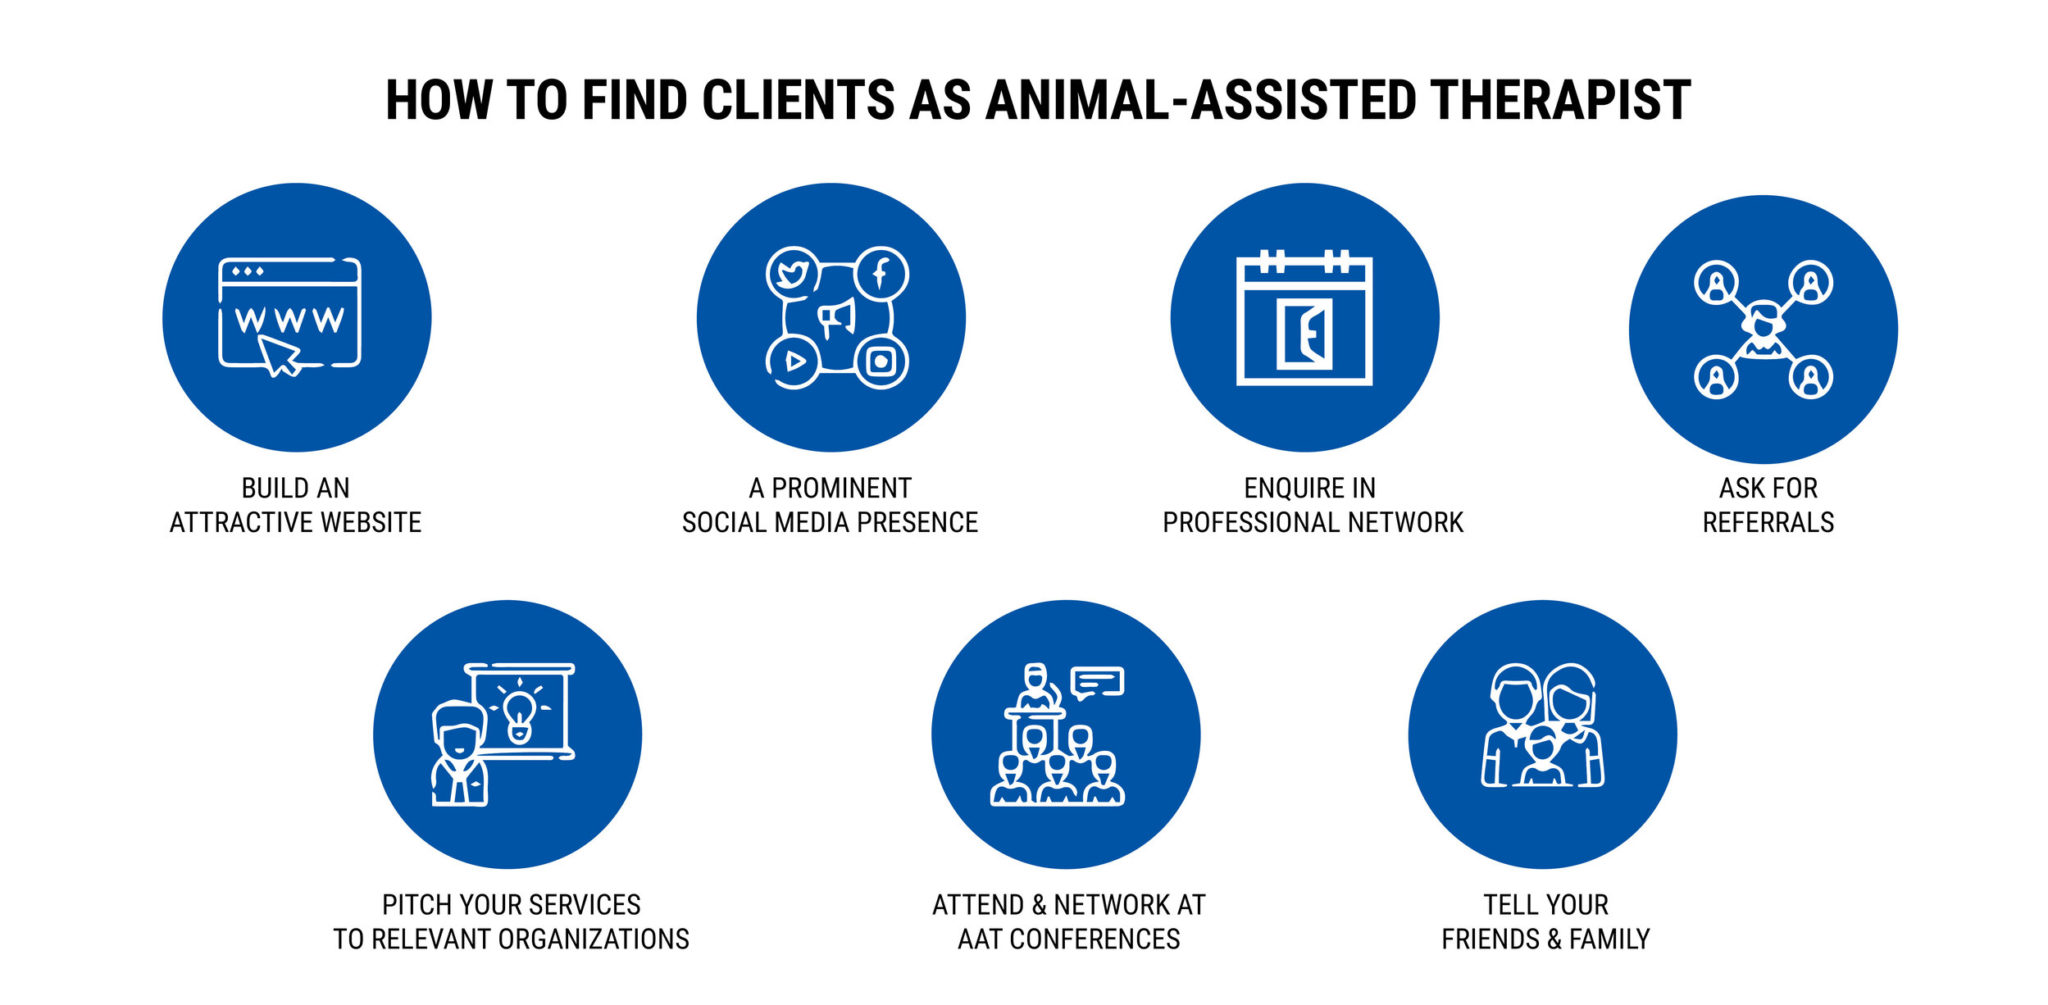 HOW TO FIND CLIENTS AS ANIMAL-ASSISTED THERAPIST